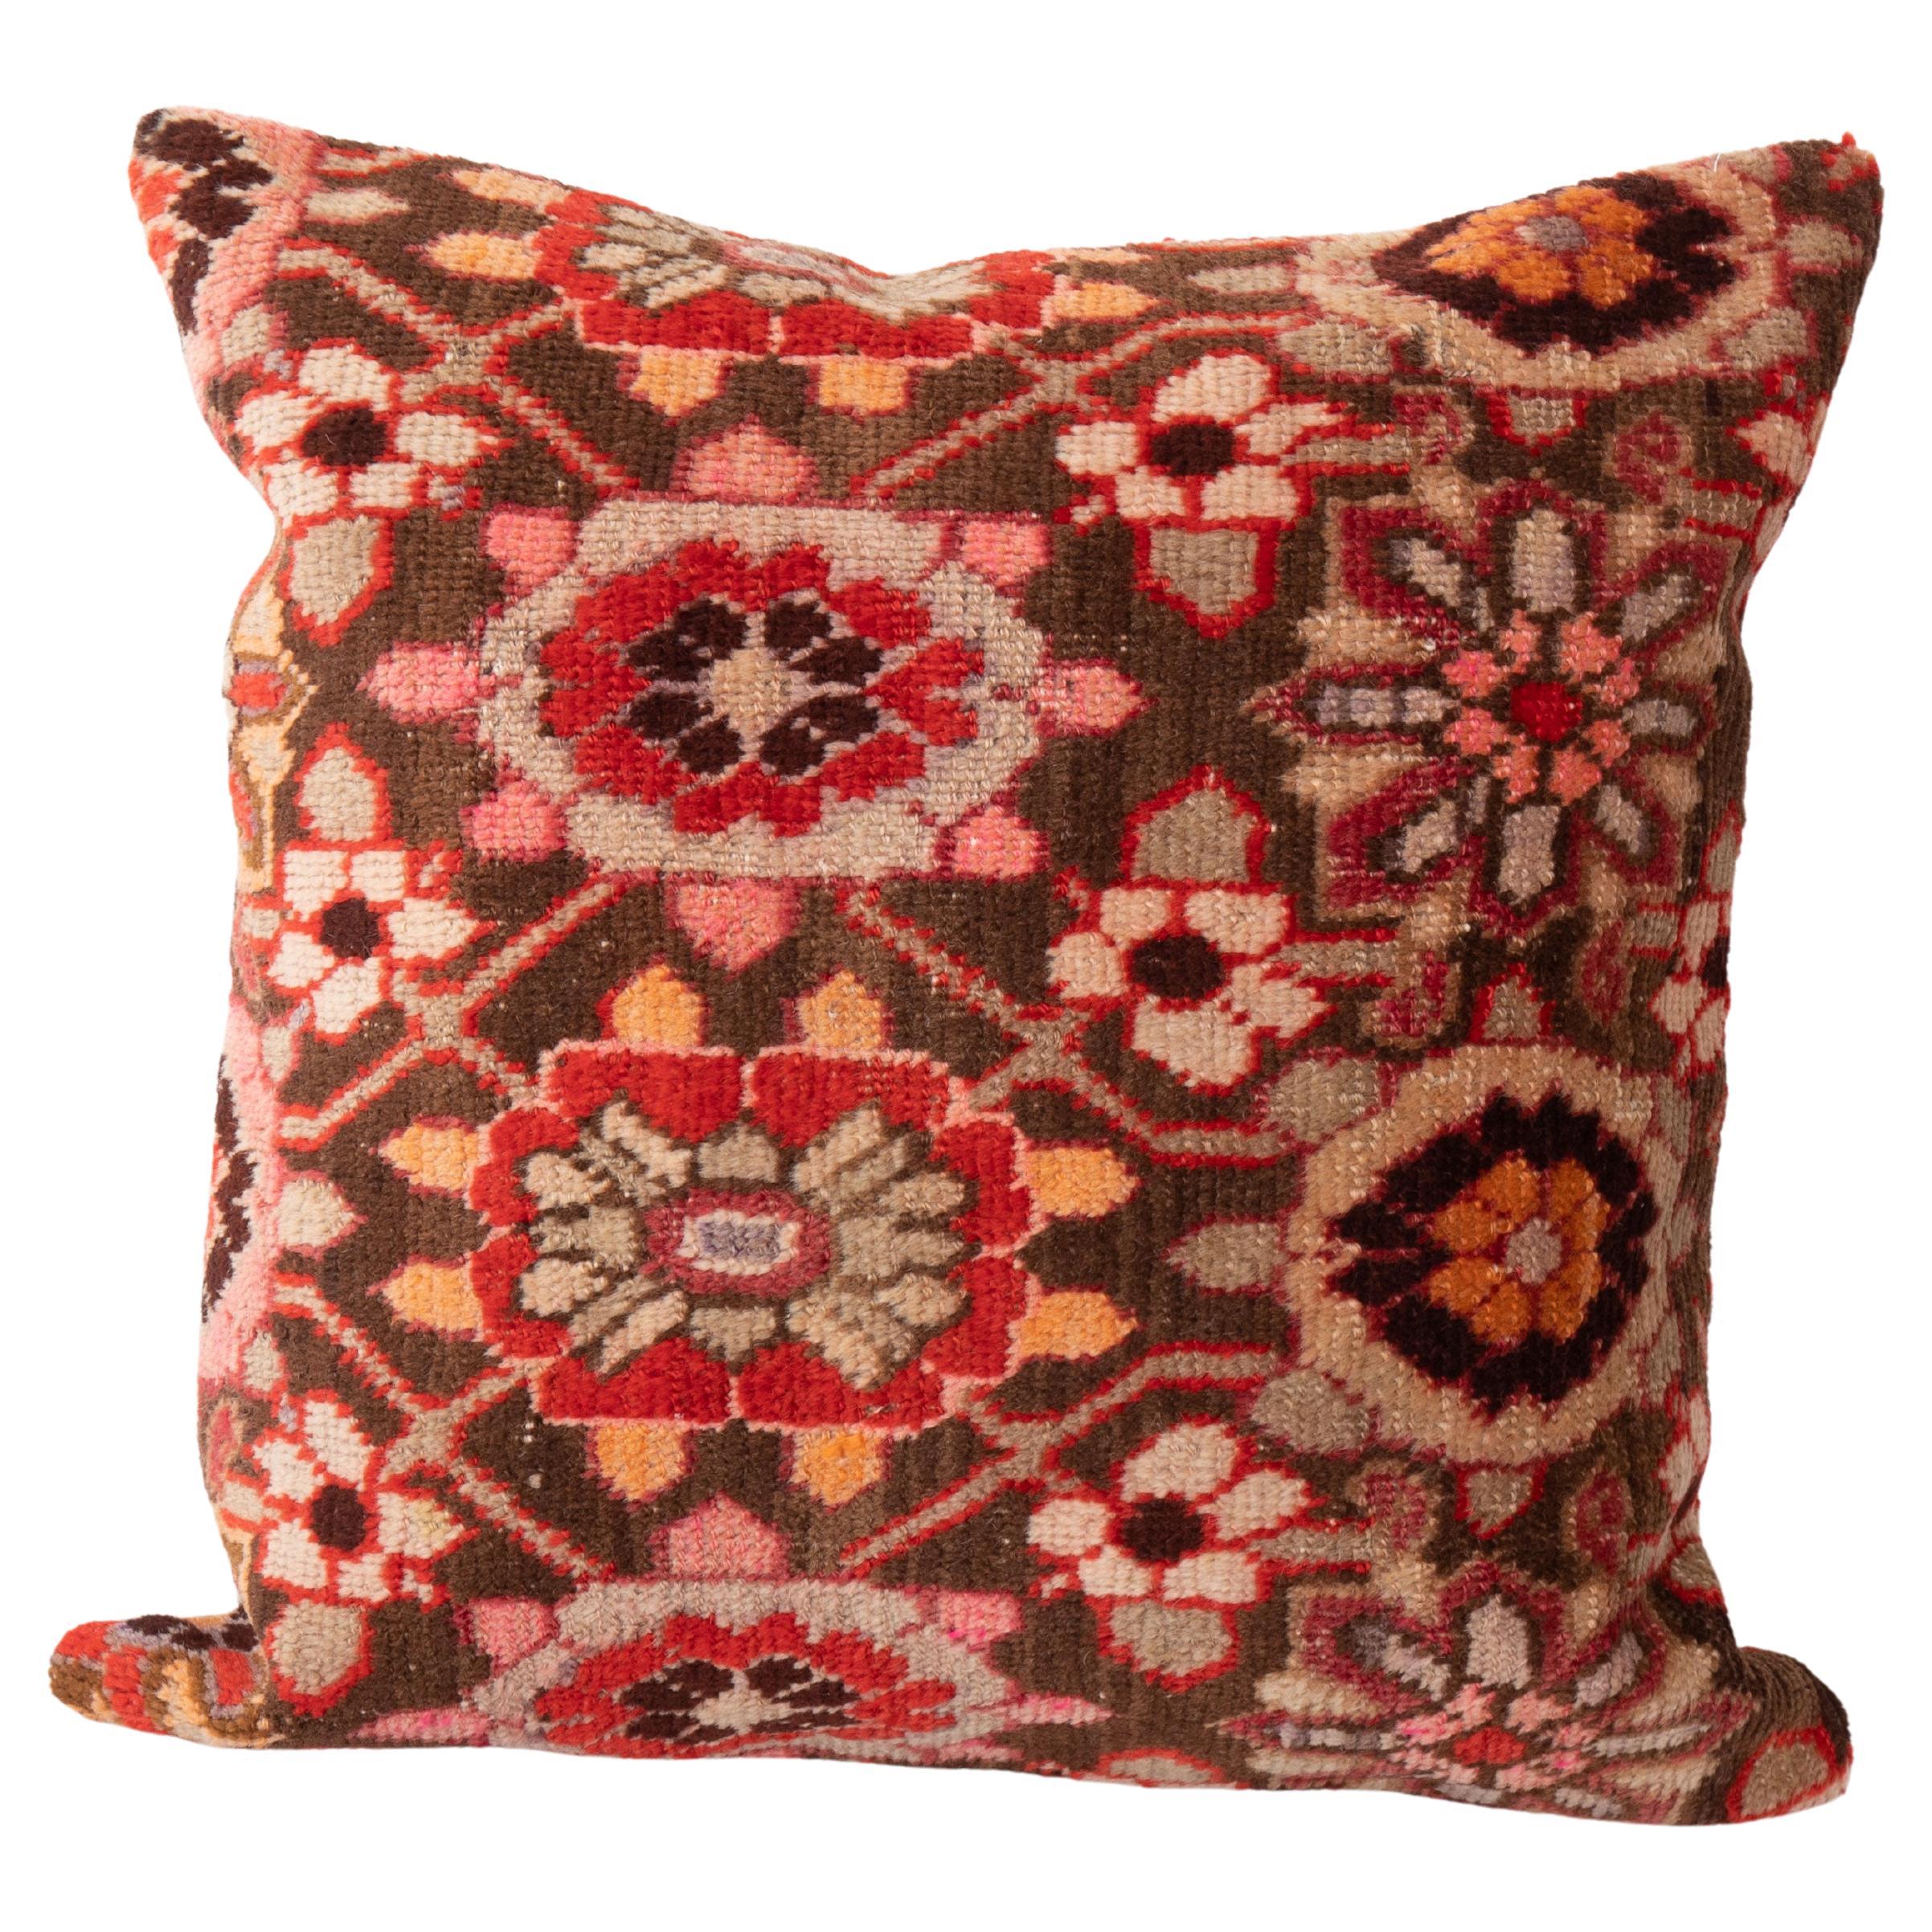 Pillow Cover Made from an Antique Caucasian Karabagkh Rug Fragment